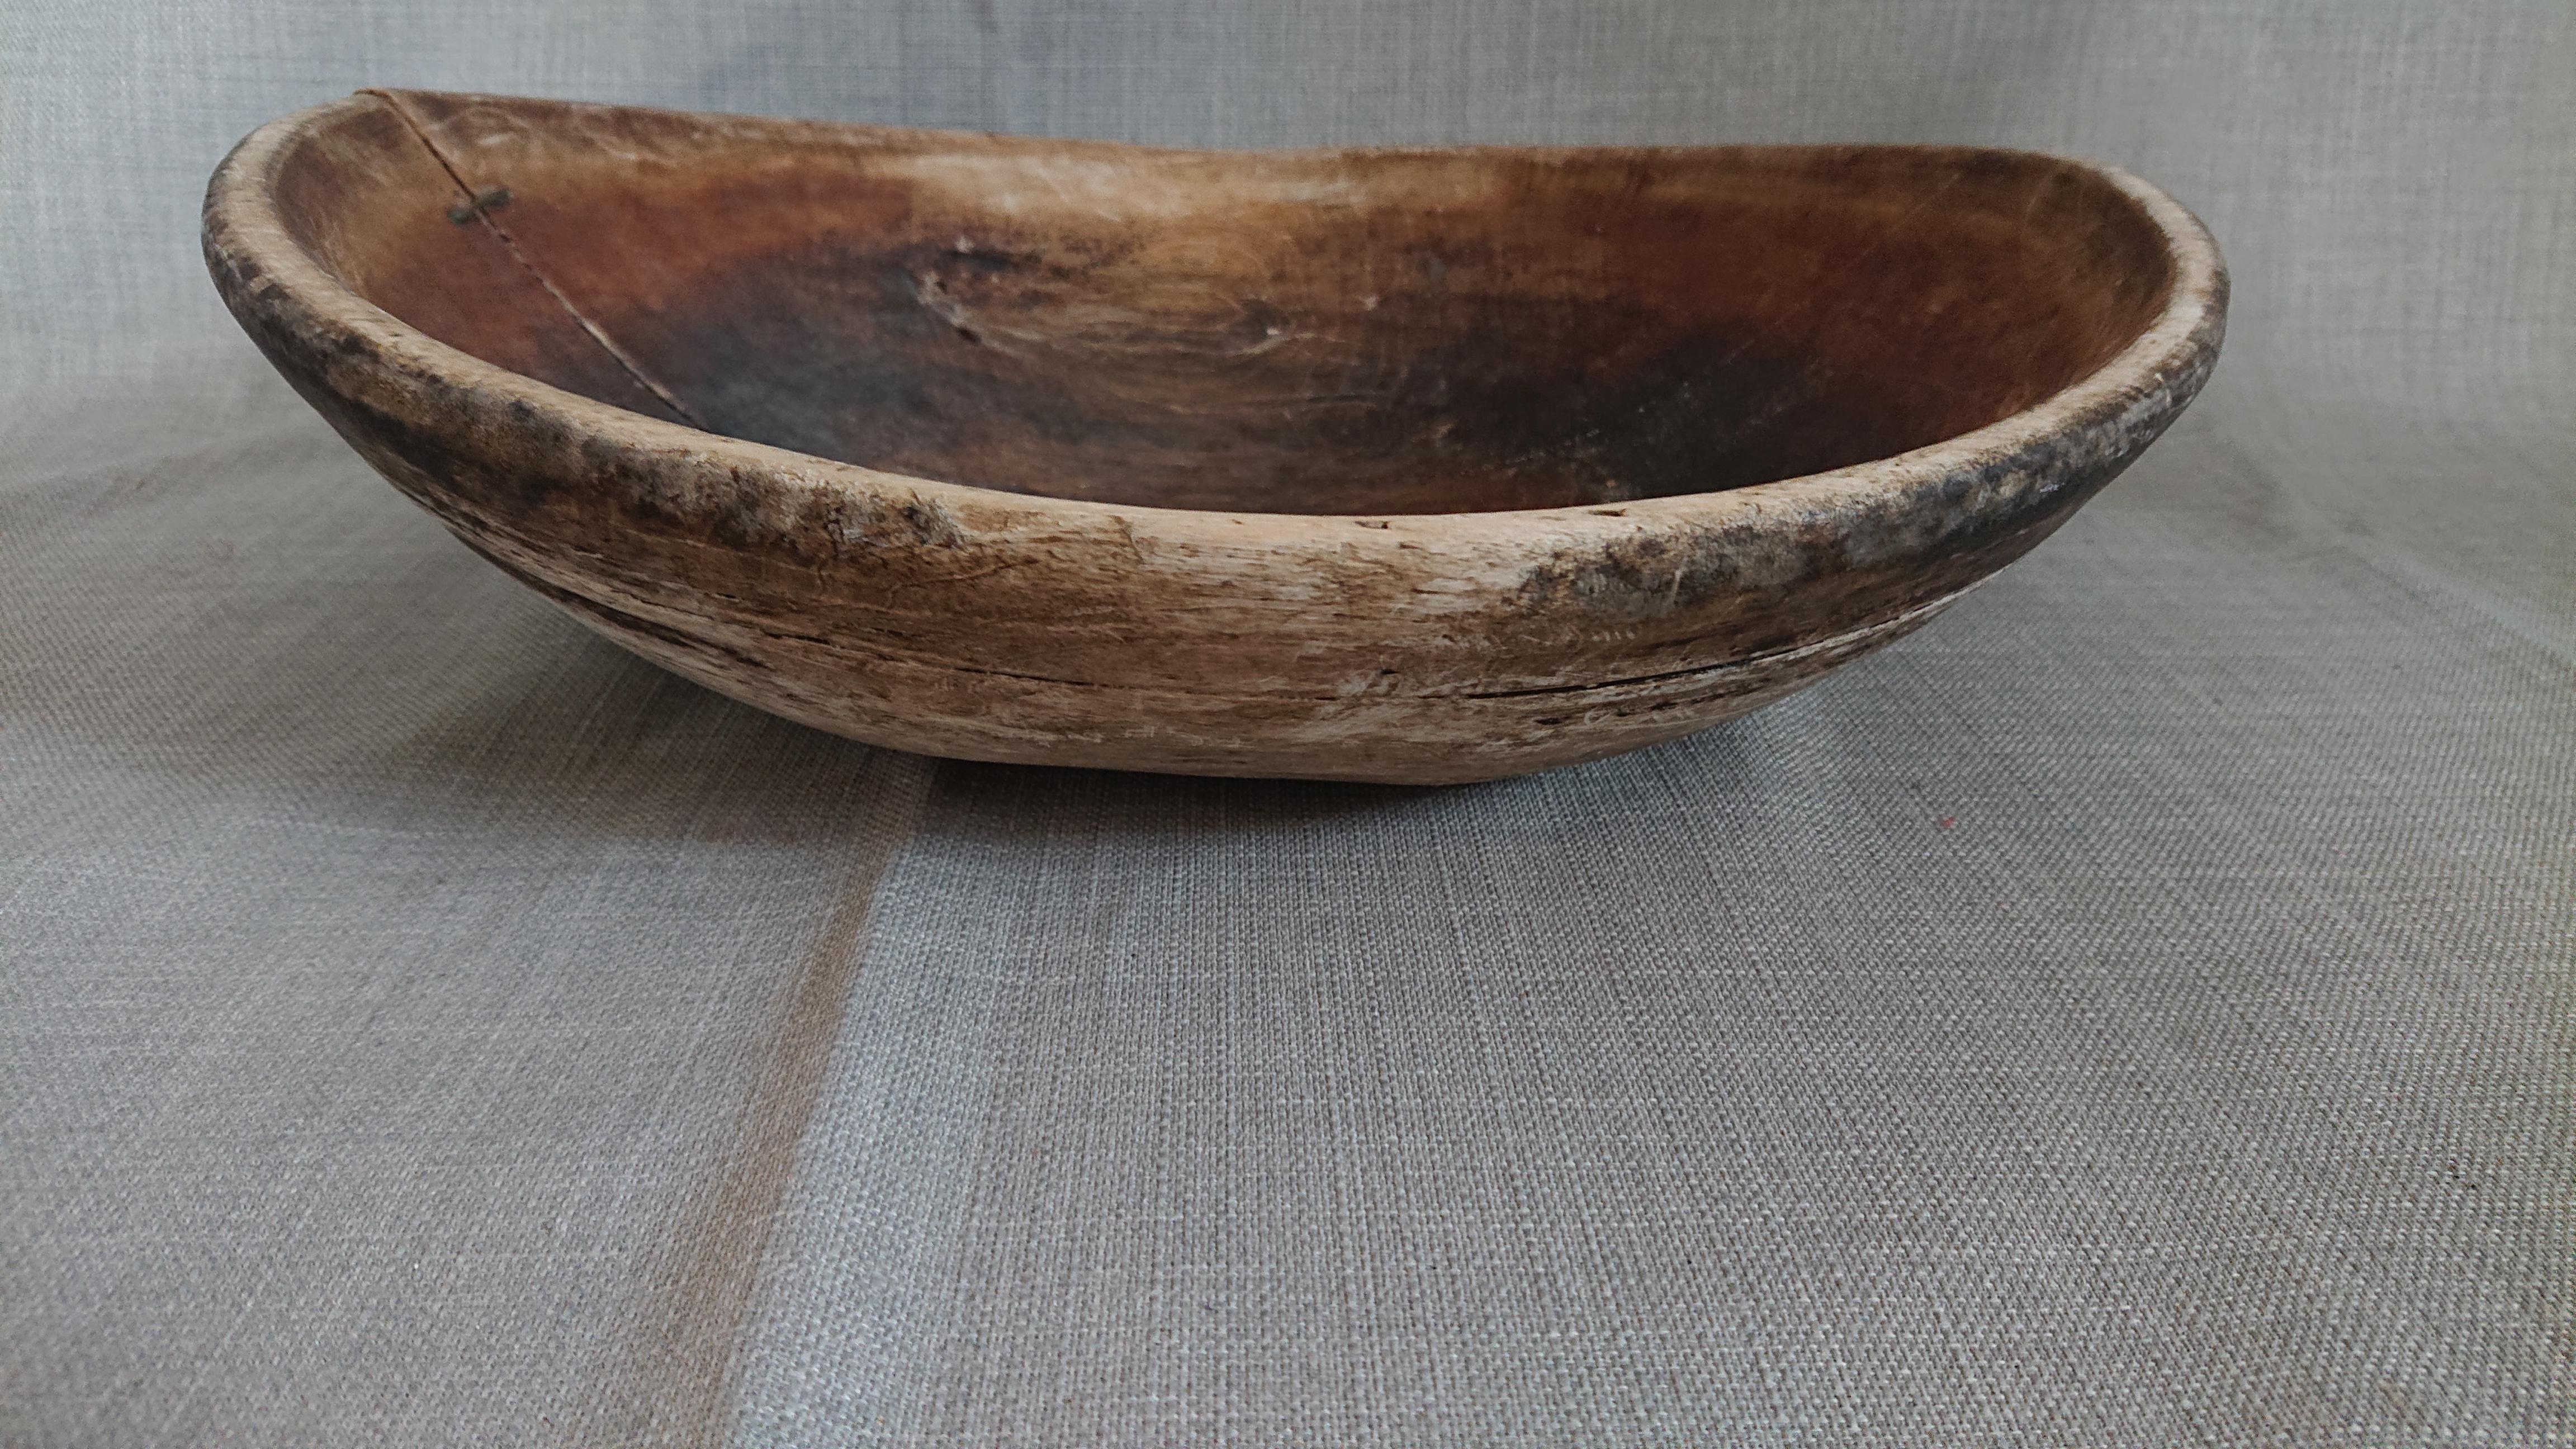 18th Century Swedish Wooden Bowl For Sale 10